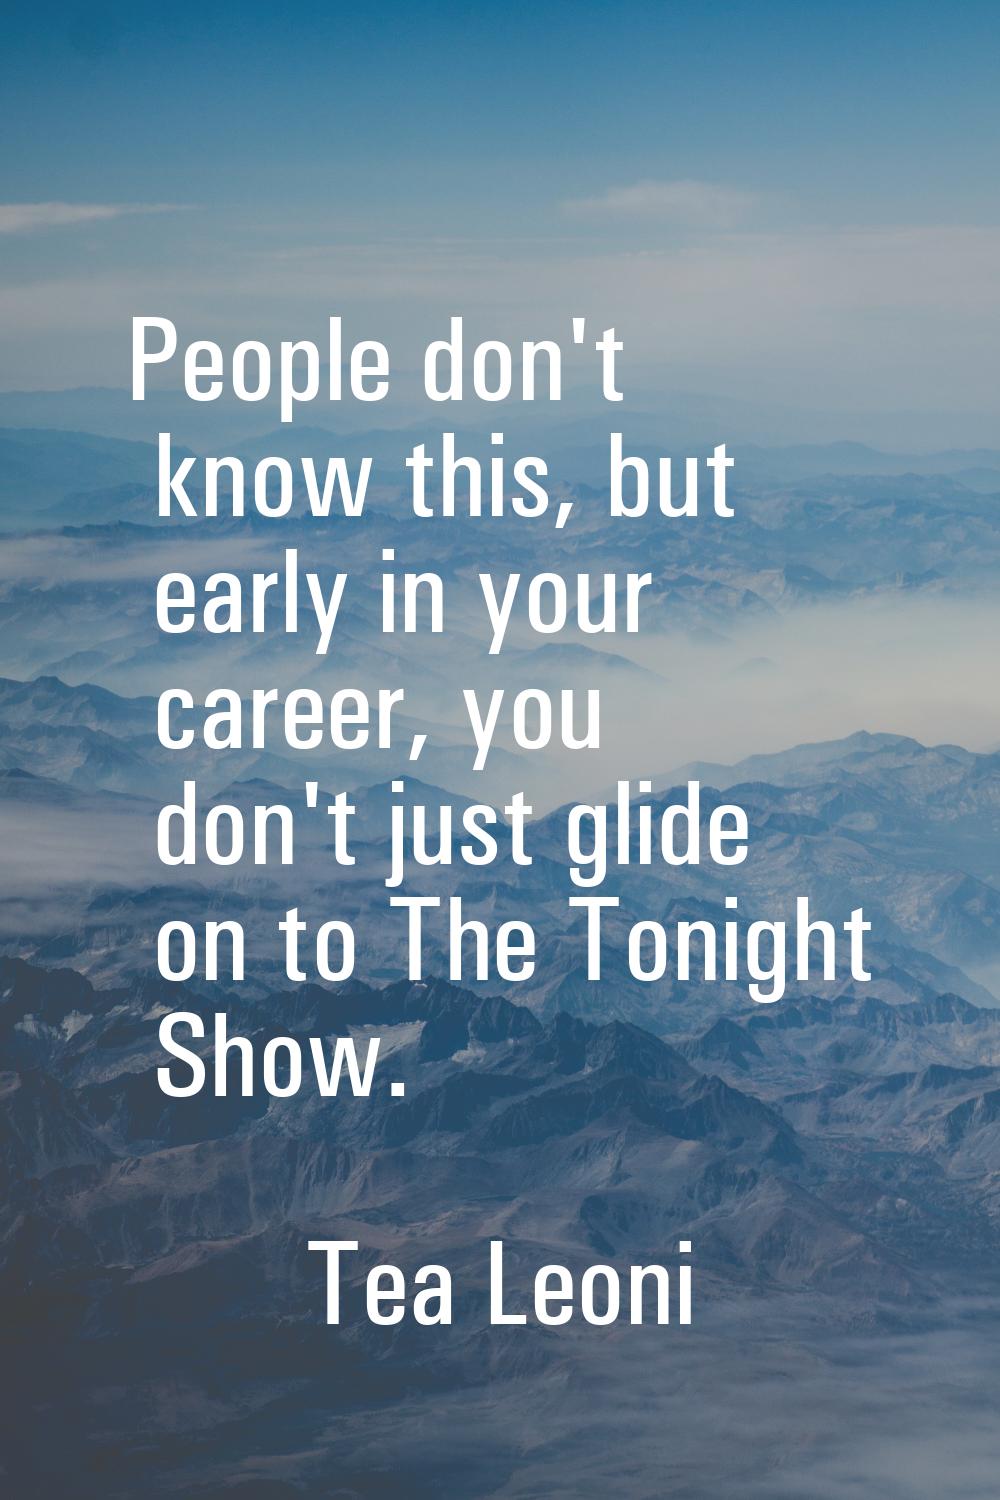 People don't know this, but early in your career, you don't just glide on to The Tonight Show.